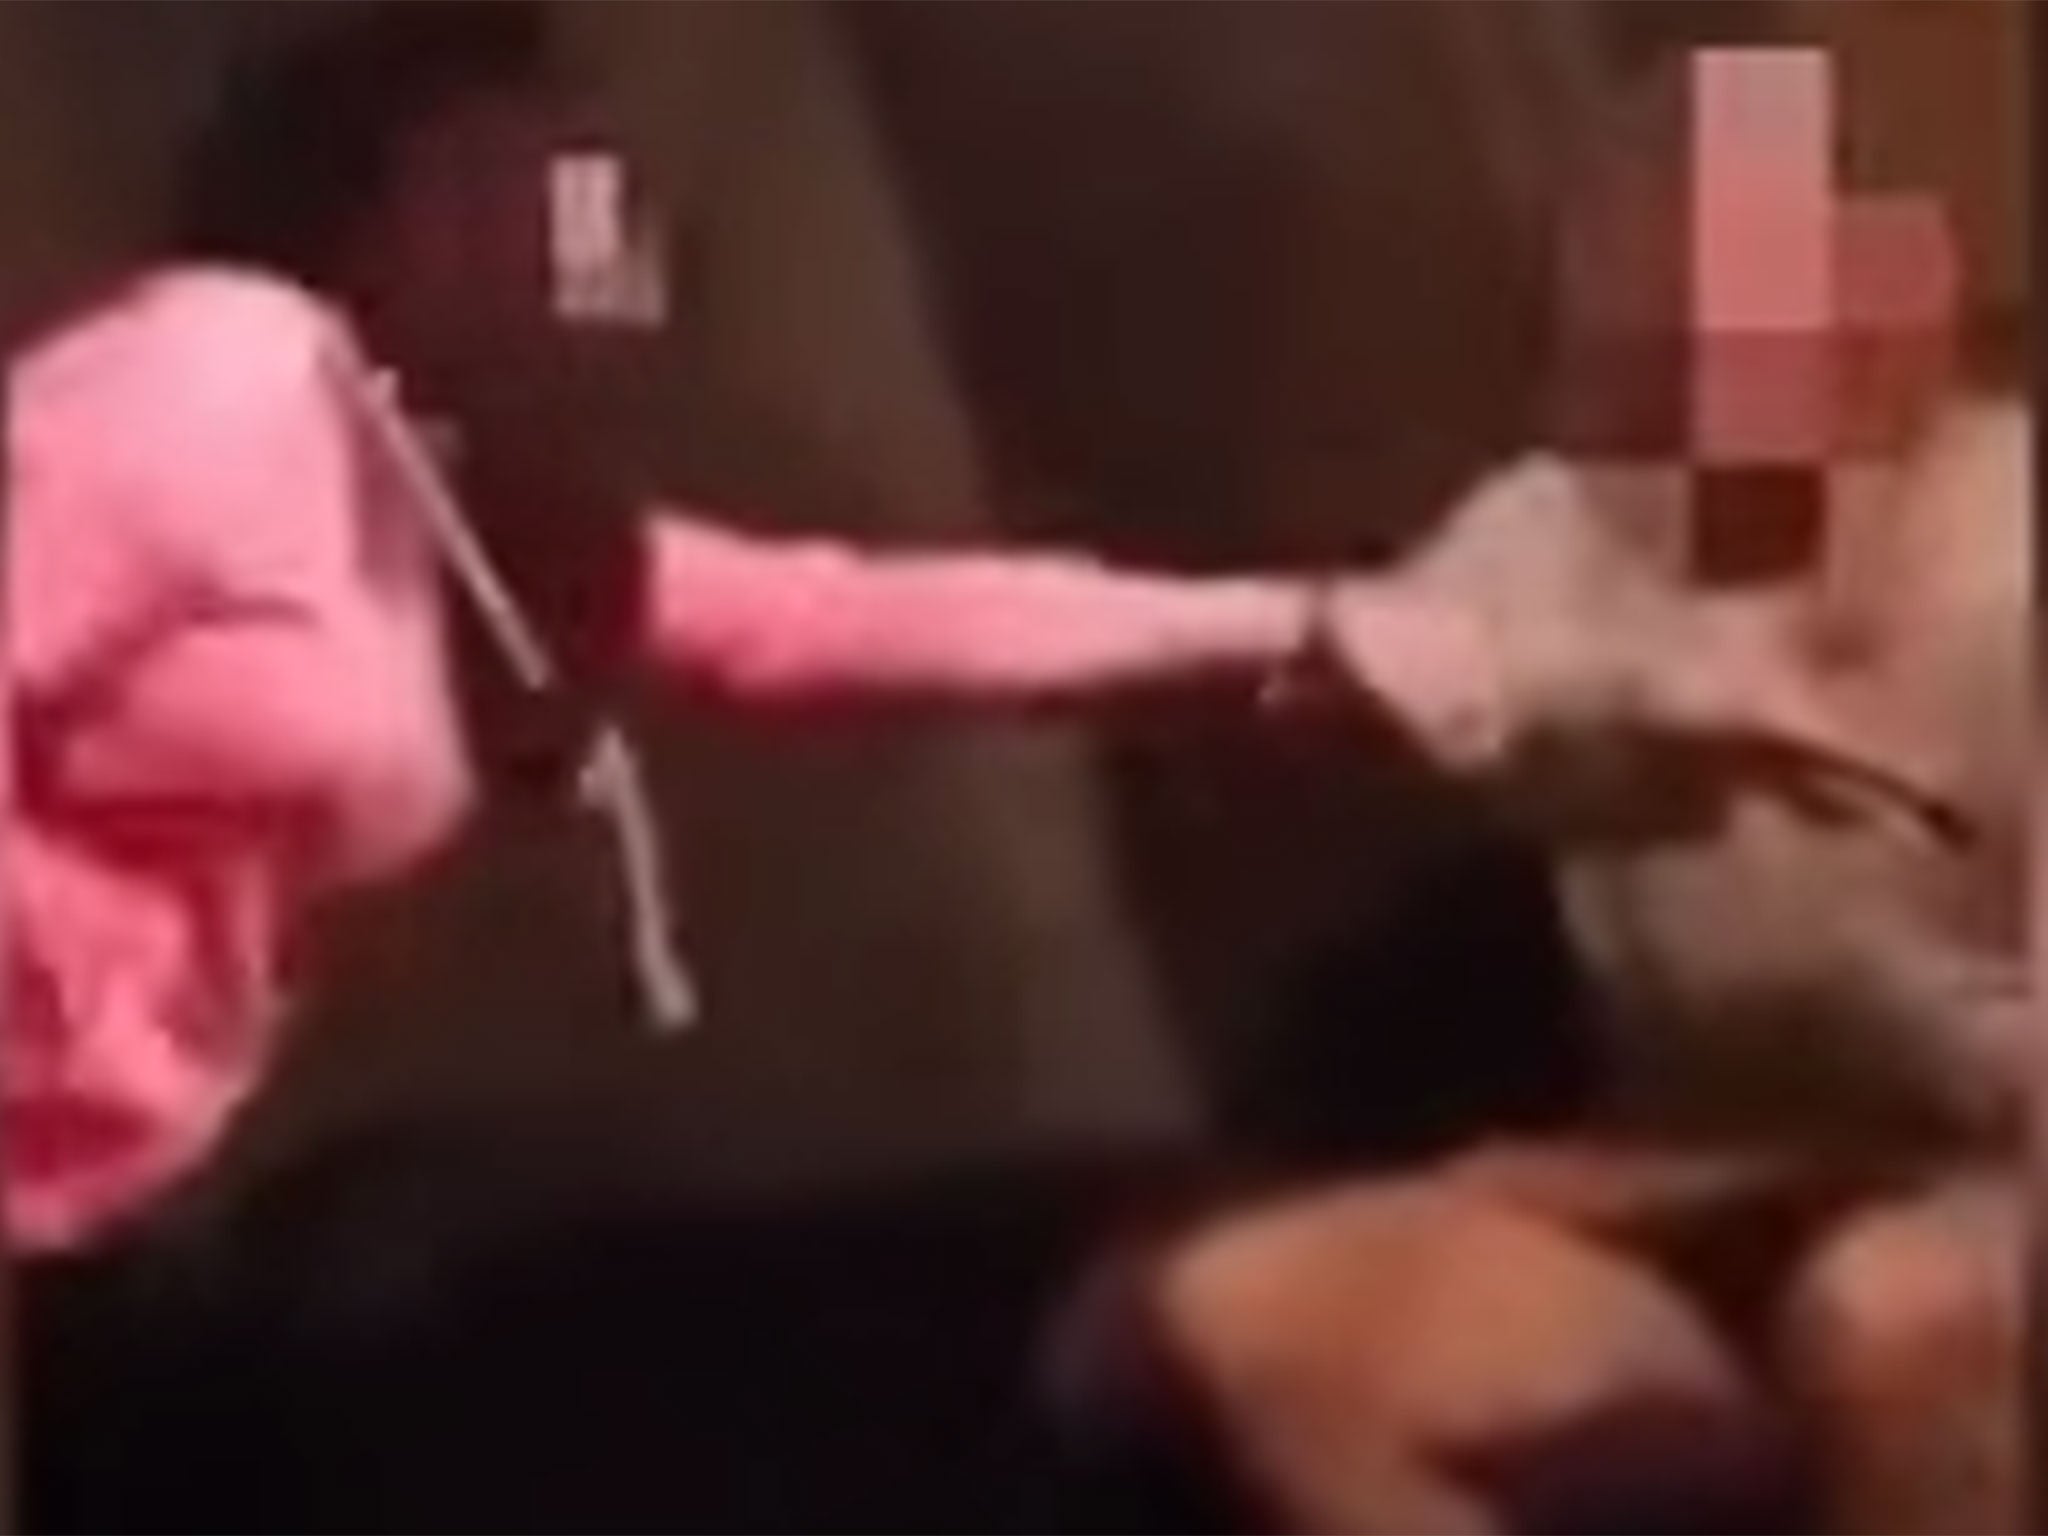 Footage of a brutal attack on an elderly man went viral, leading police to the assailants 